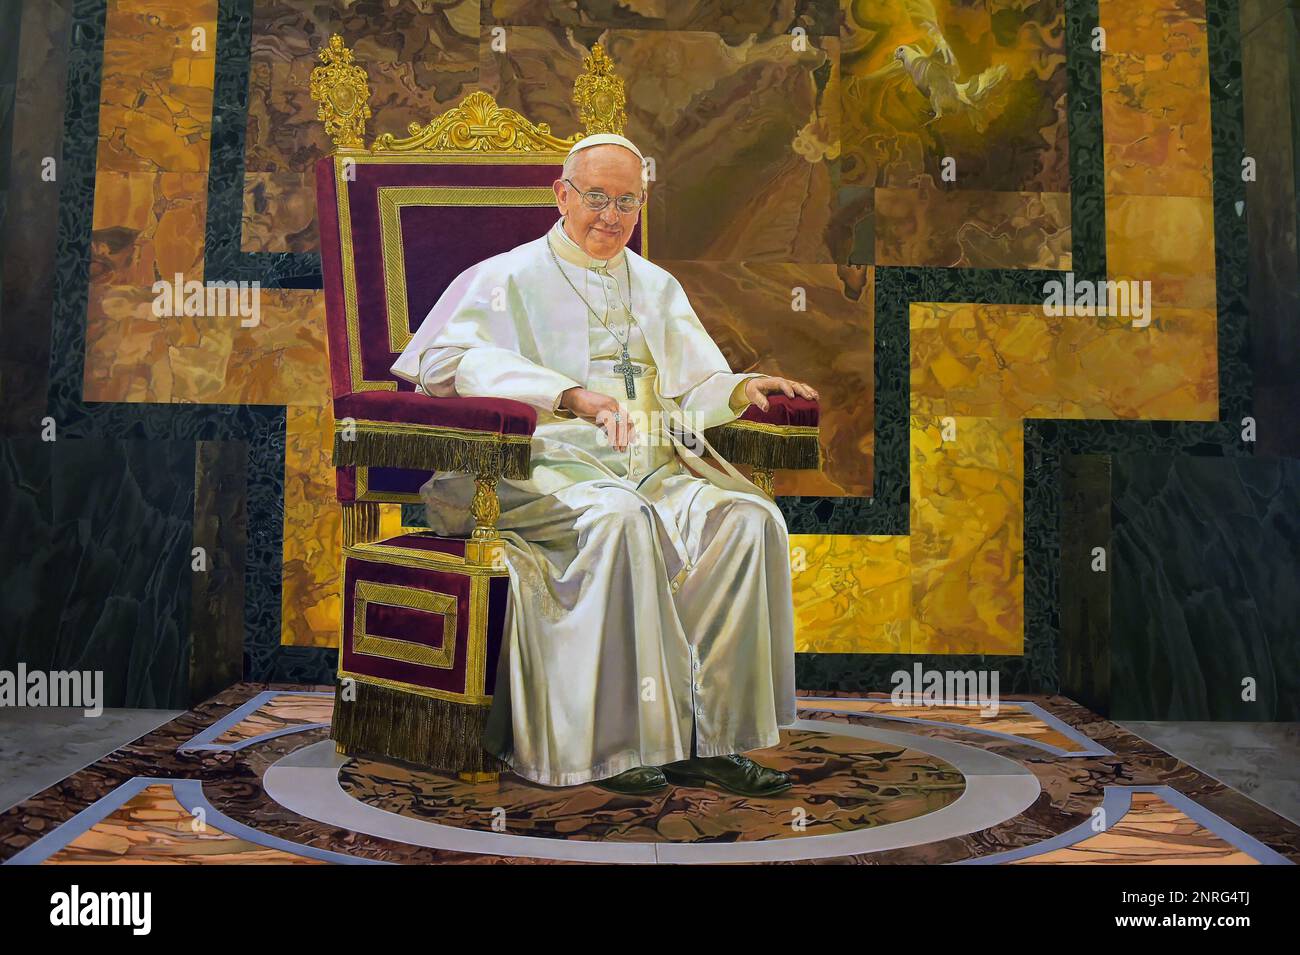 A portrait of Pope Francis in the new papal portrait gallery in the Apostolic Palace of Castel Gandolfo, Italy on September 11, 2015. Photo by Eric Vandeville/ABACAPRESS.COM Stock Photo